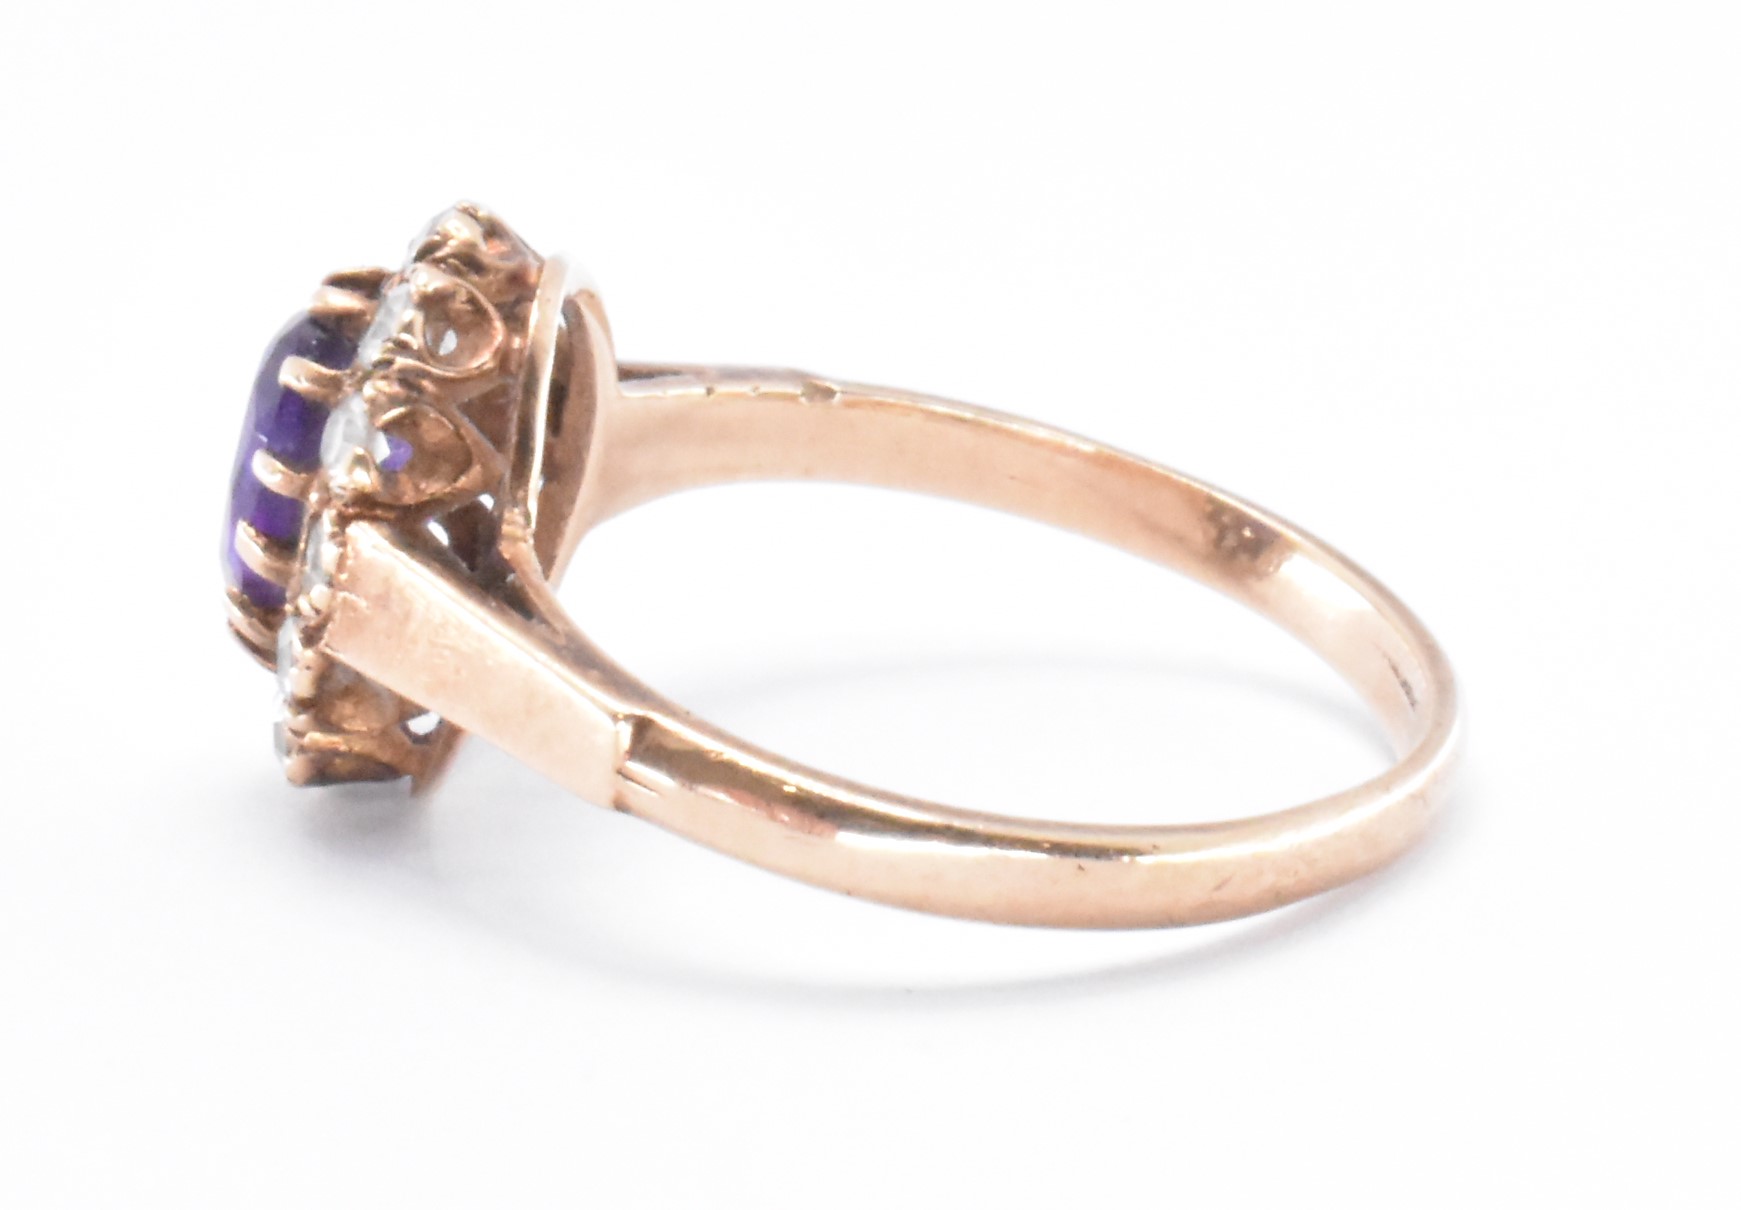 GOLD AMETHYST & WHITE STONE CLUSTER RING - Image 2 of 6